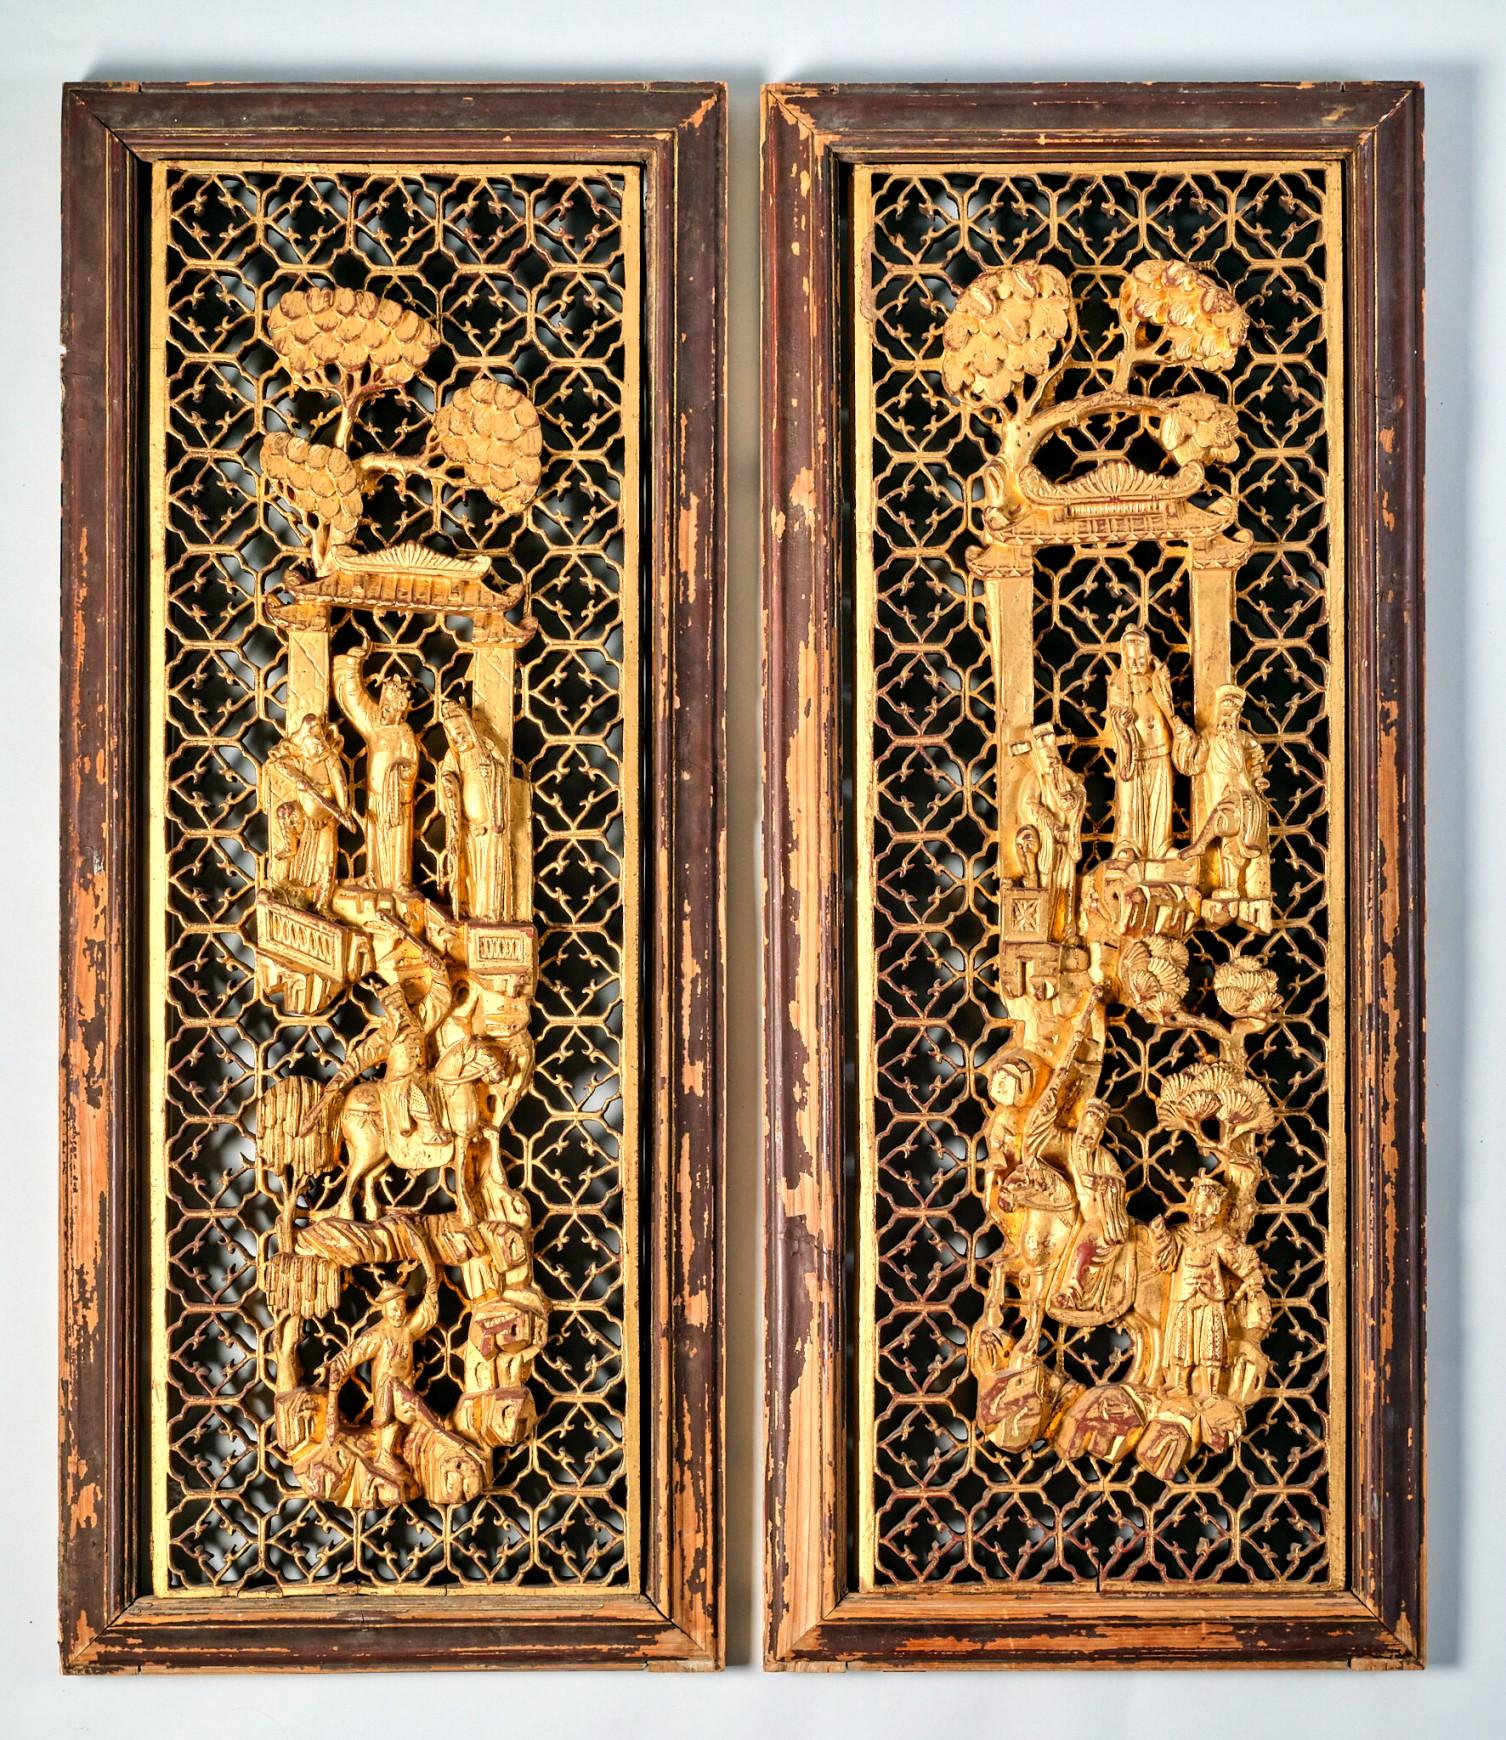 An exceptional & highly decorative pair of antique Chaozhou hand carved giltwood panels, both showing finely executed relief-carved & gilded vignettes, composed in a terraced format depicting scholarly figures standing beneath ‘moon gate’